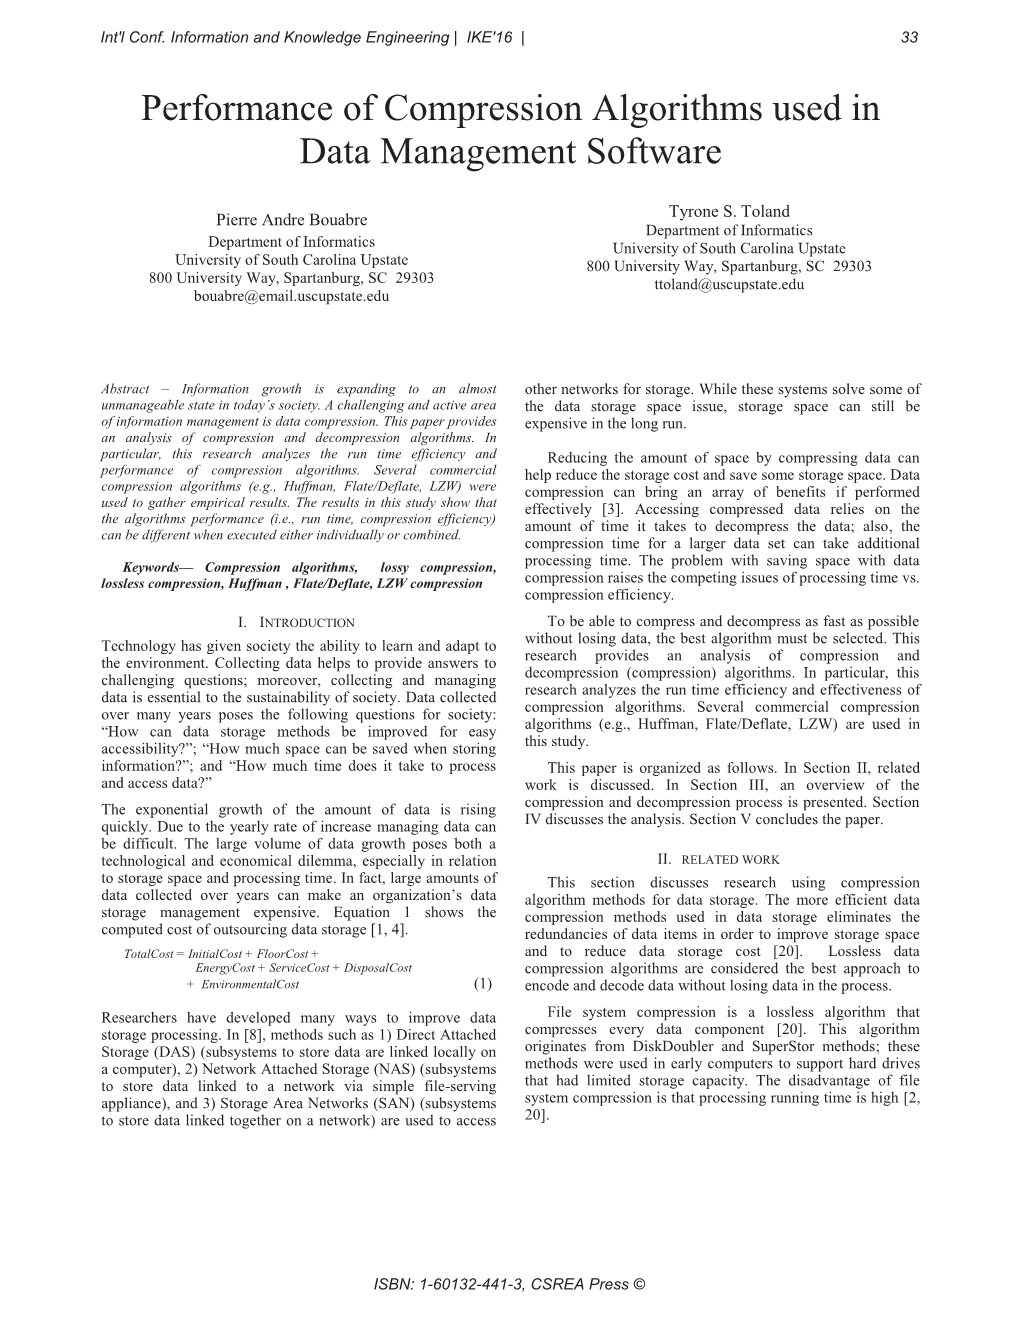 Performance of Compression Algorithms Used in Data Management Software